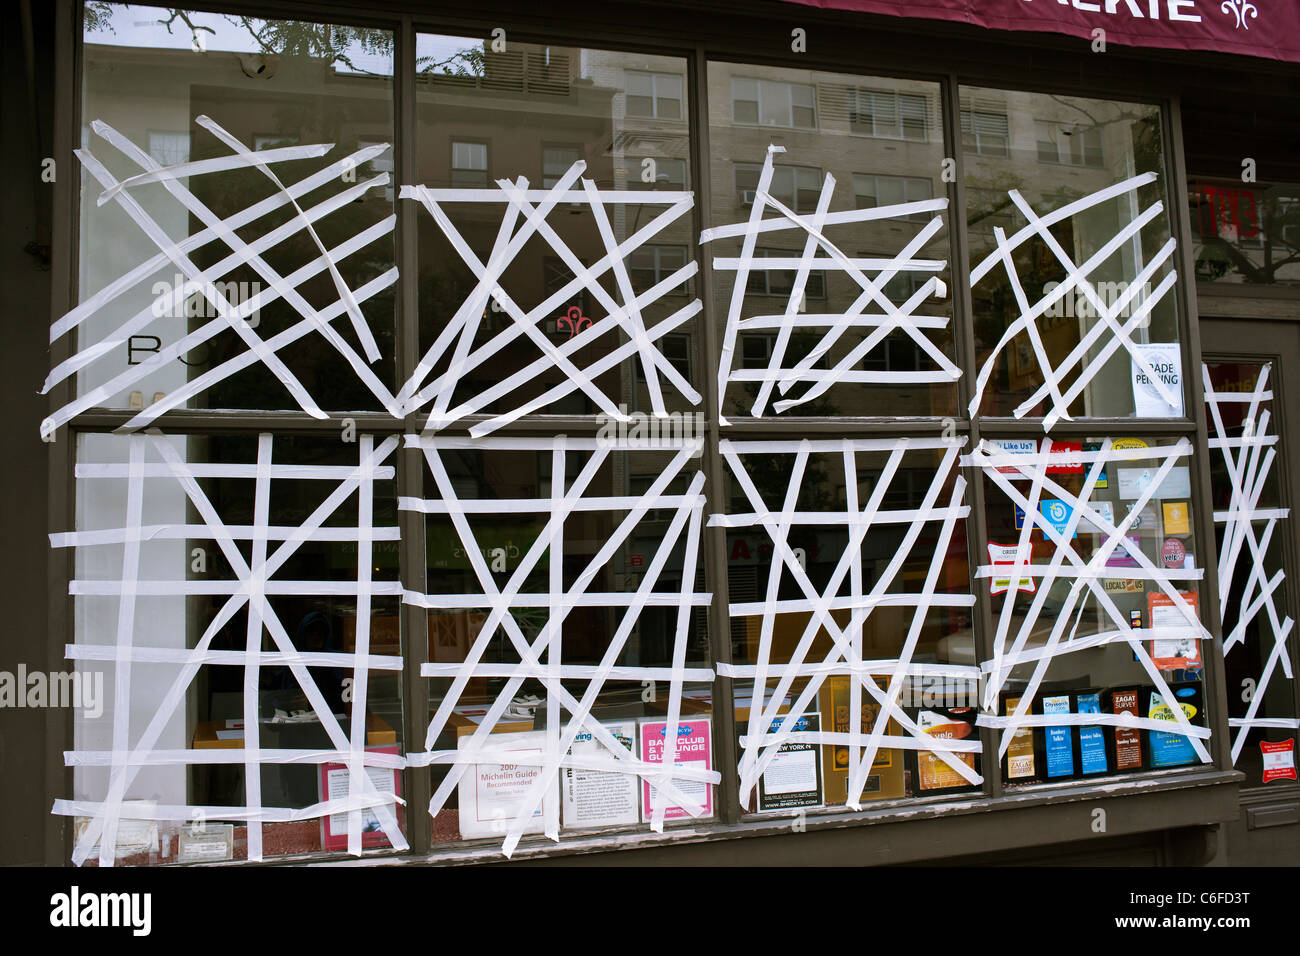 Stores in the Chelsea neighborhood of NY tape windows as protection